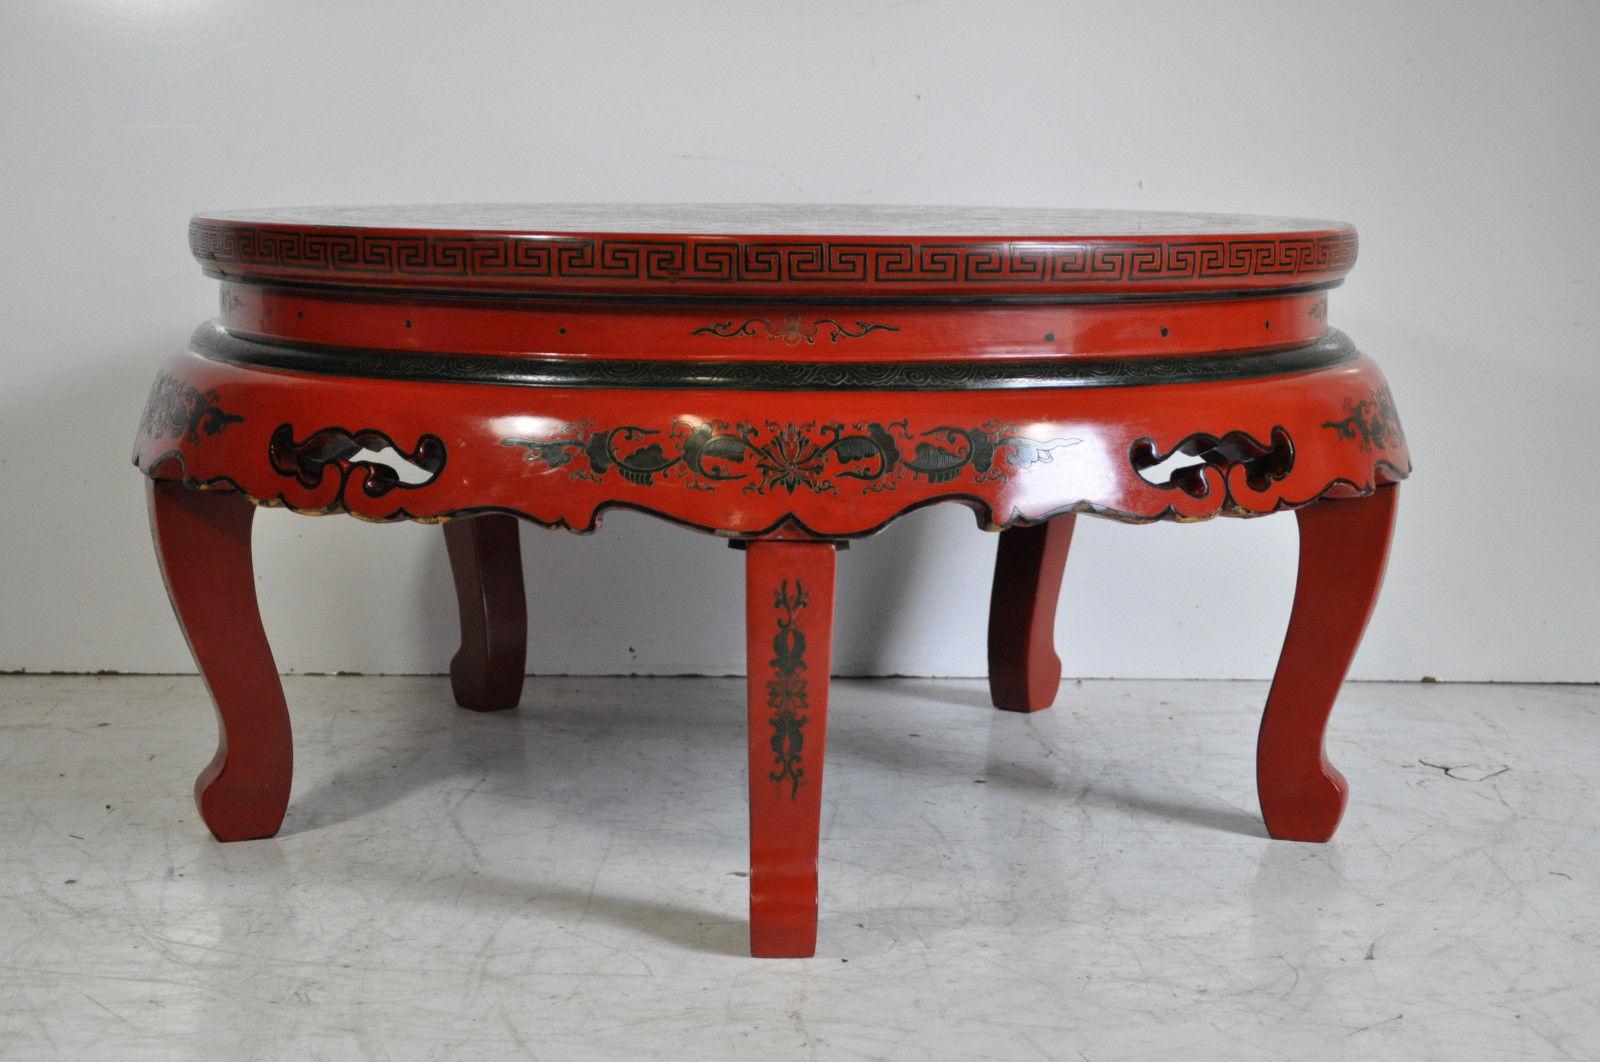 Stunning vintage red lacquer Oriental folding leg coffee table. The piece features a beautiful hand painted lacquer finish with a plethora of decorative motifs on the top, nicely carved legs and skirt, and collapsible legs for ease of storage, circa